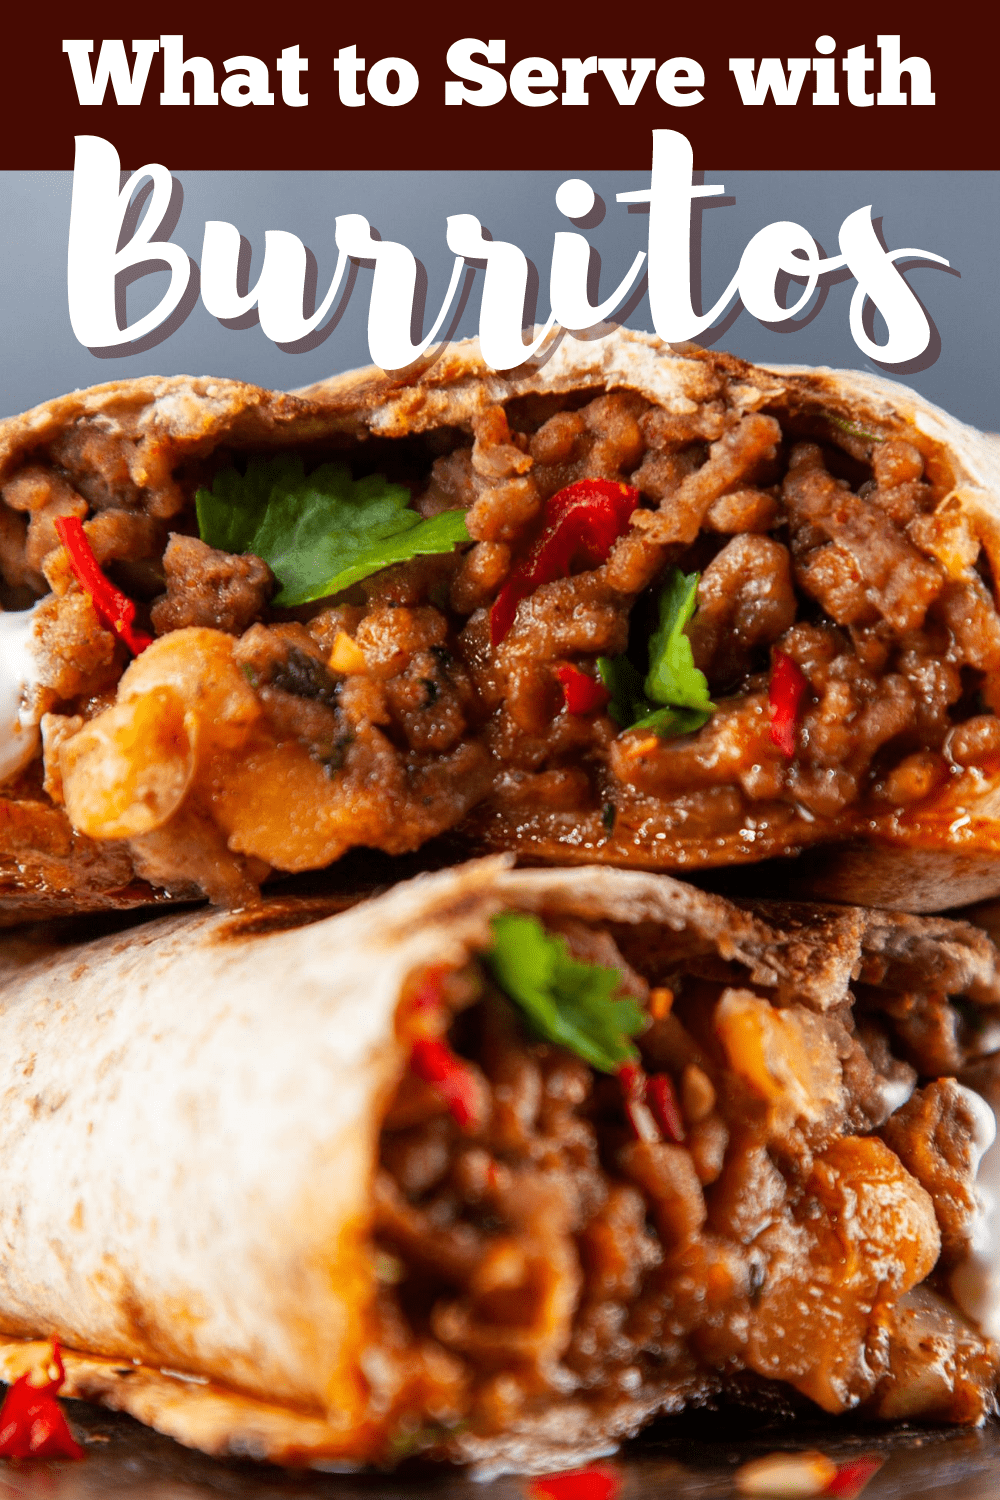 14 Best Side Dishes for Burritos - Insanely Good